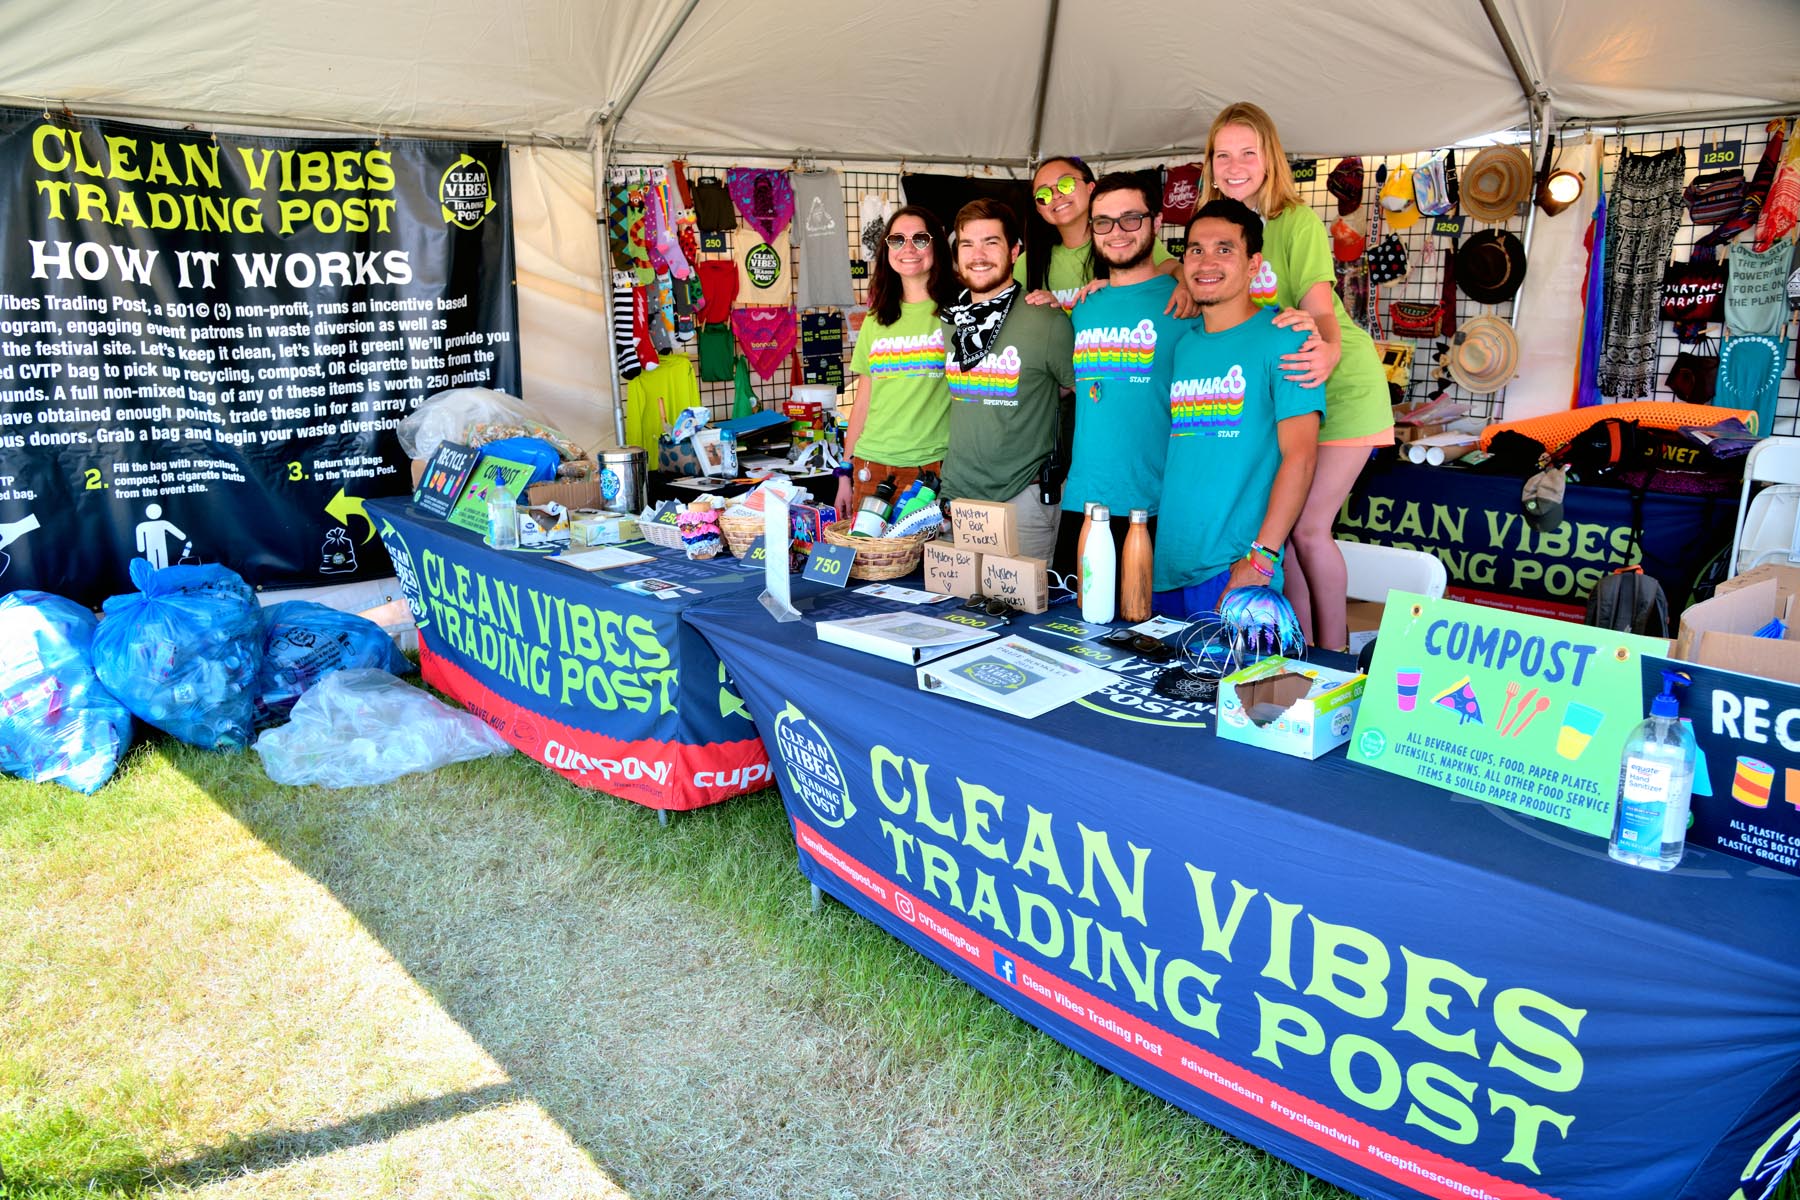 How You Can Be More Sustainable As A Festival Attendee